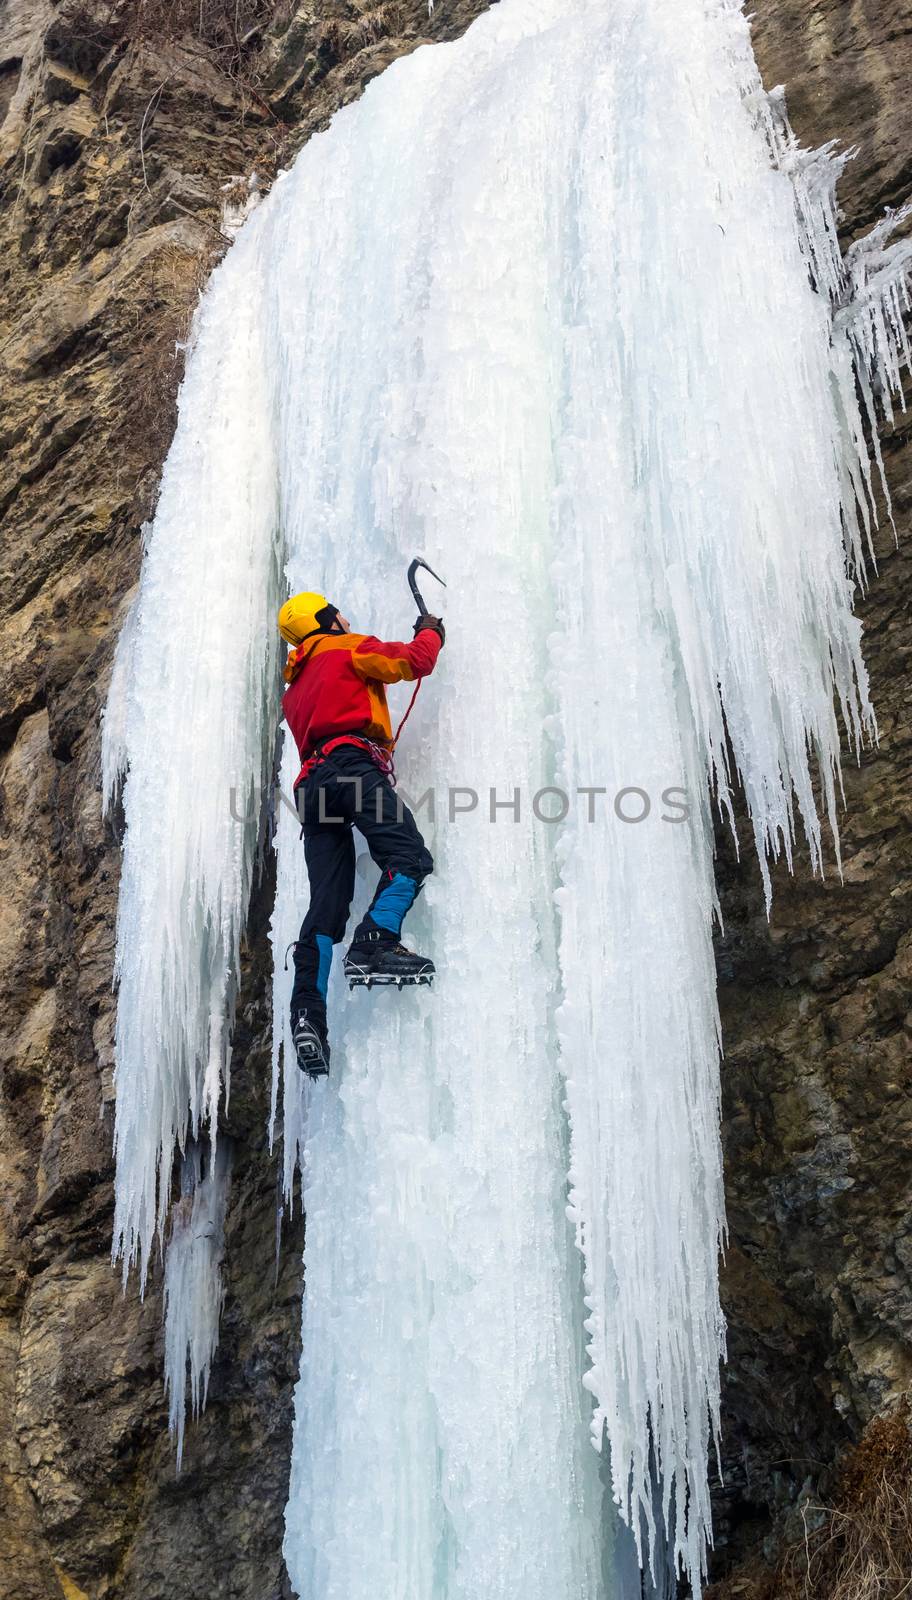 Man climbing the frozen waterfall using ice axes and crampons. Extreme ice climbing. Winter